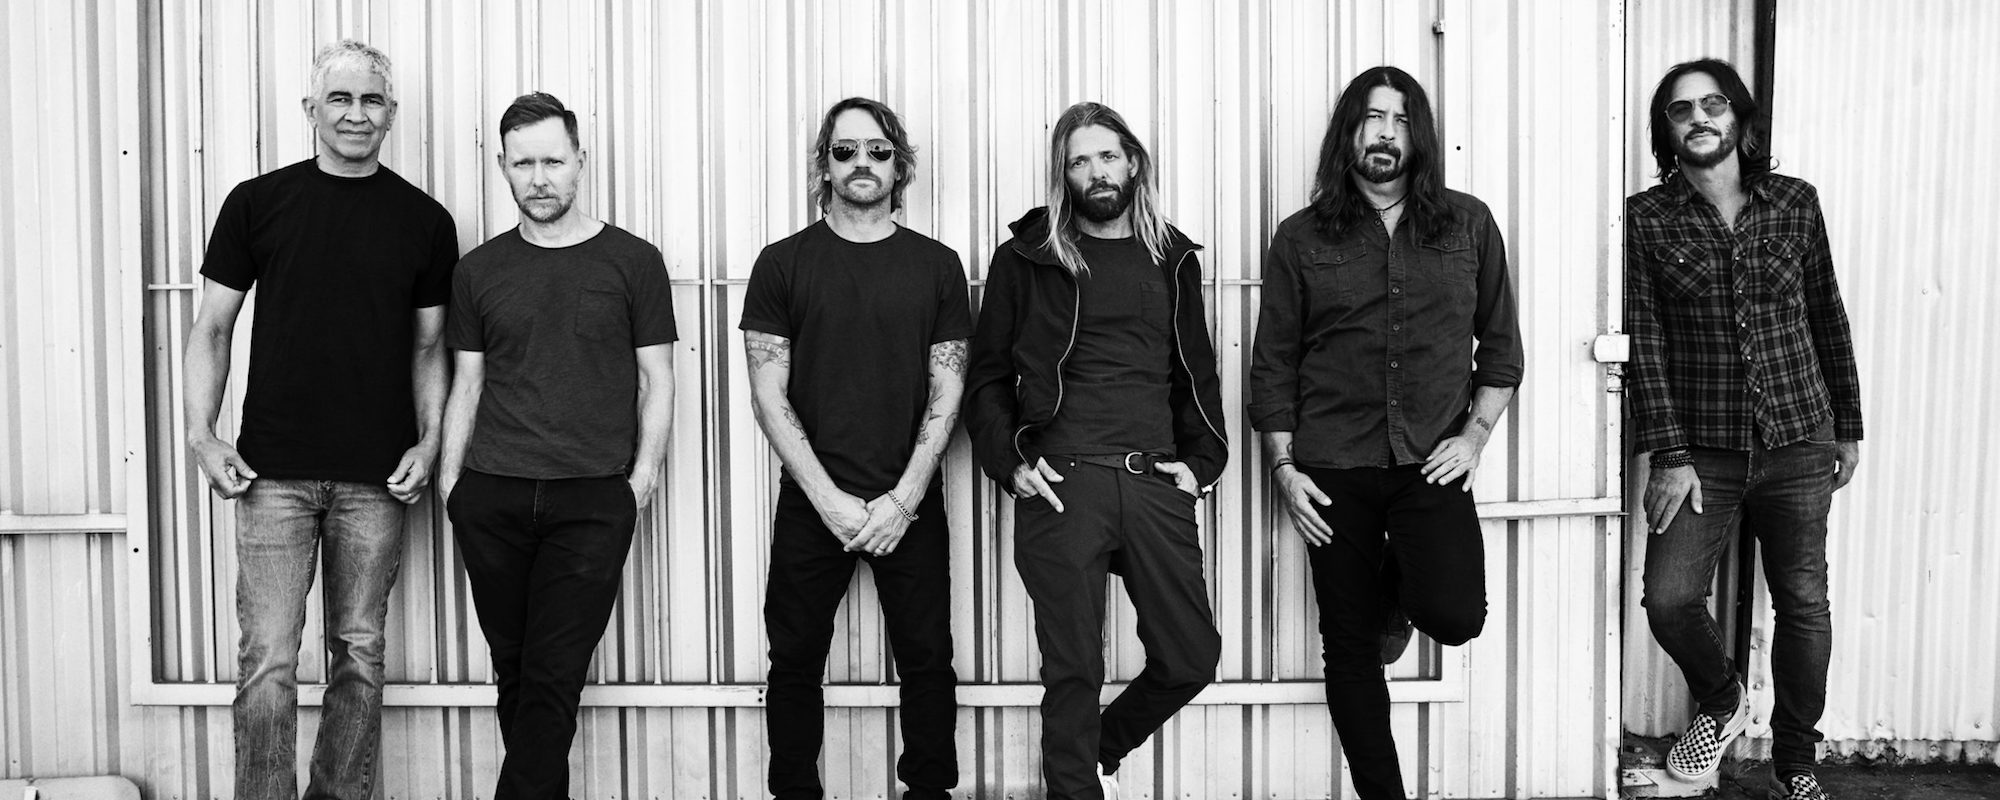 Lyrics for These Days by Foo Fighters - Songfacts